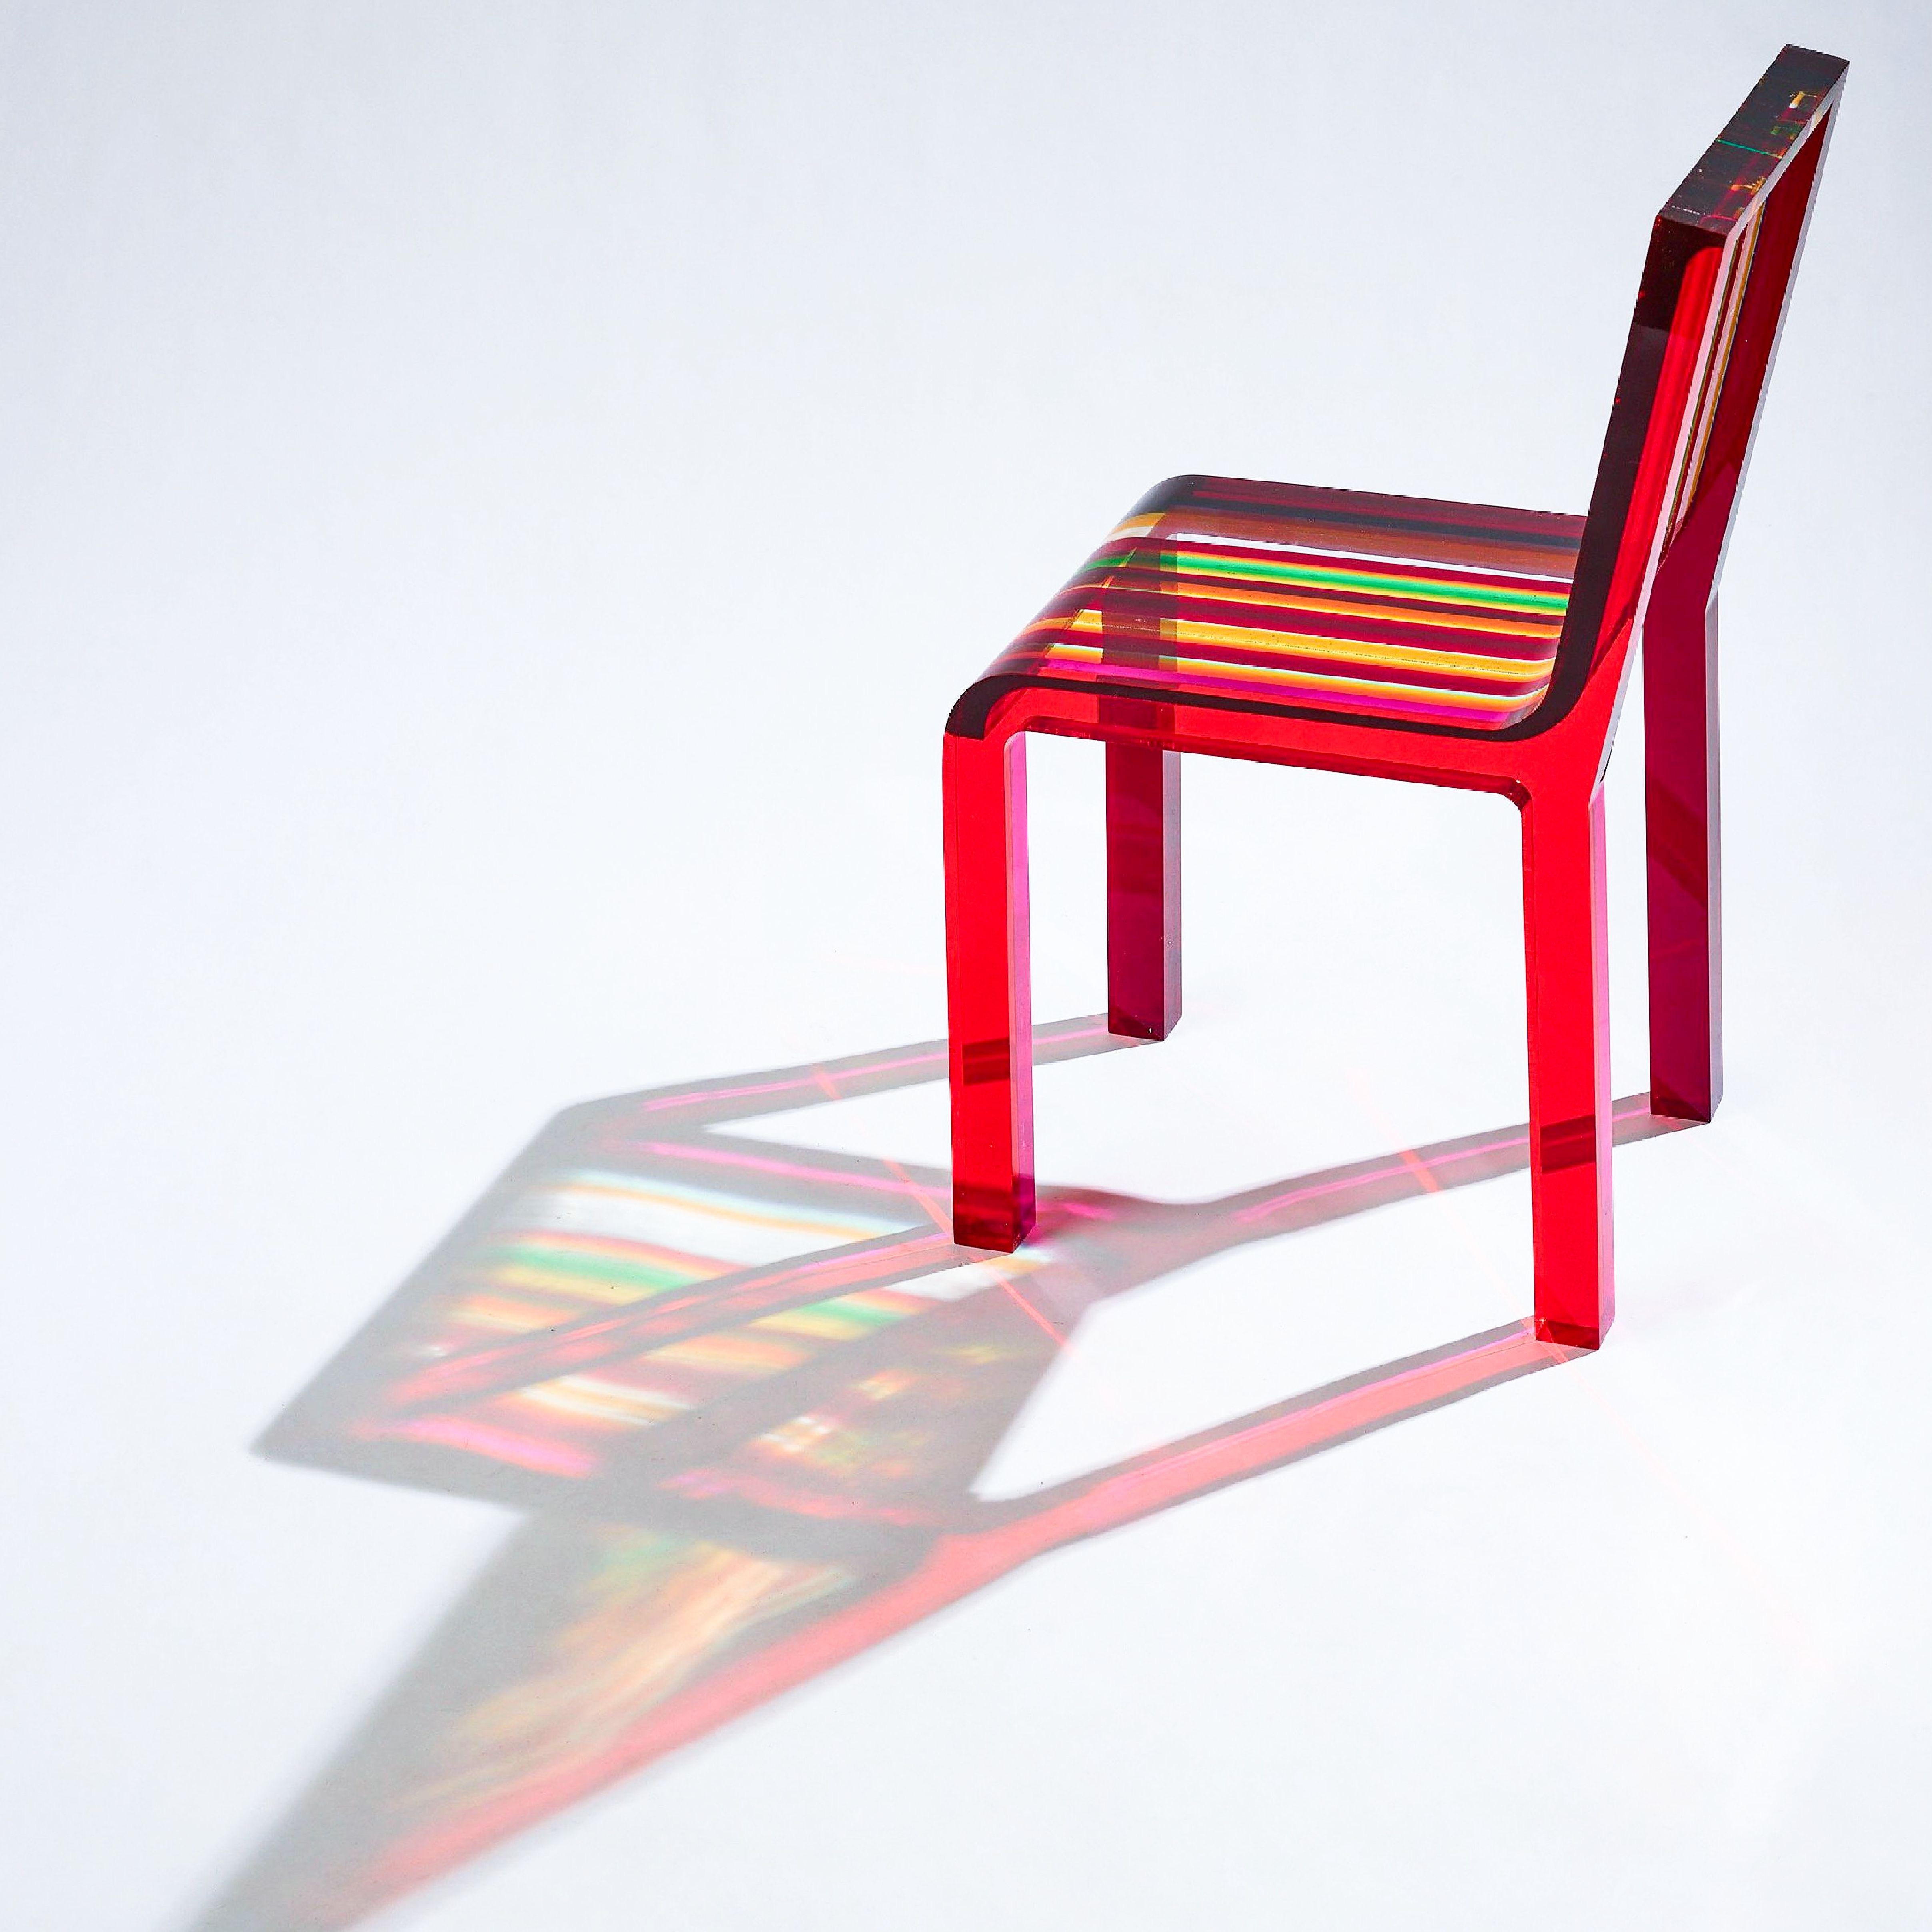 Rainbow Chair by Patrick Norguet for Cappellini 2000 Multi-Color Lucite Acrylic In Good Condition For Sale In Brooklyn, NY